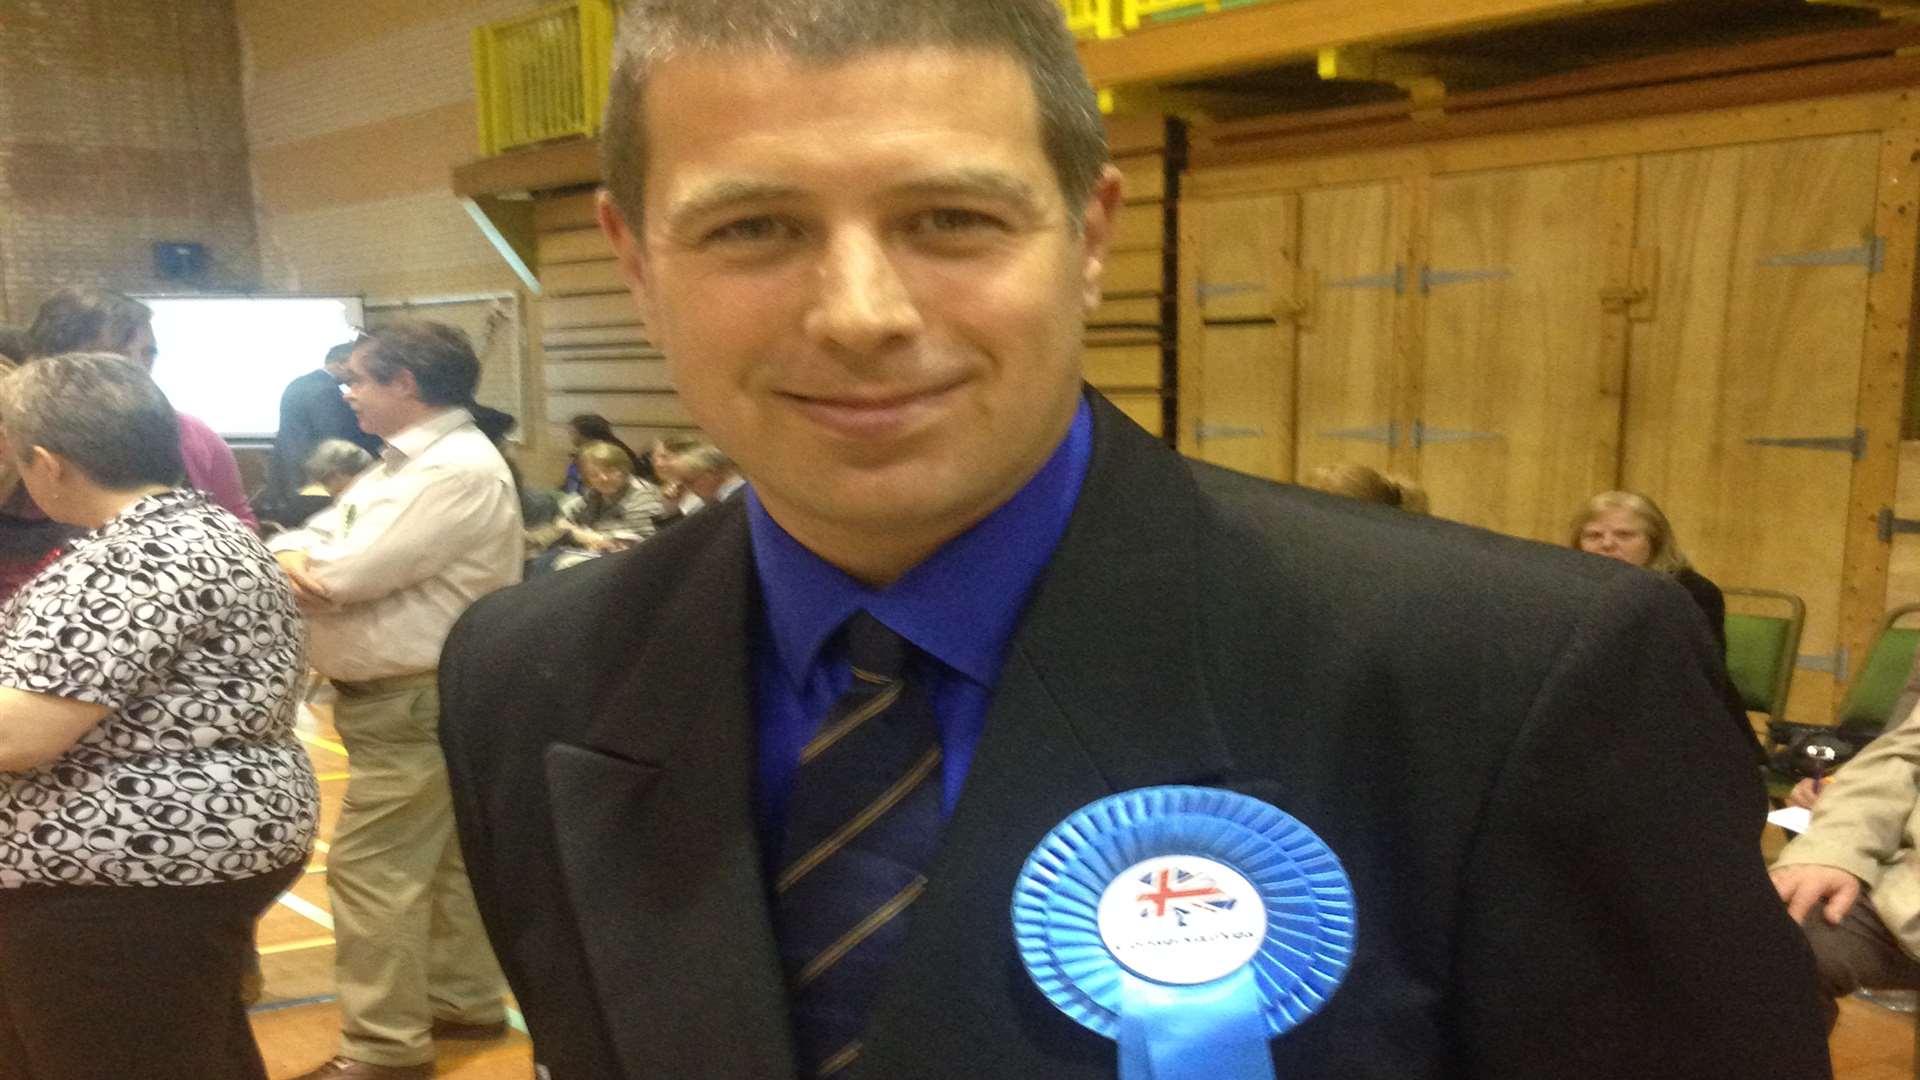 Mr Bowen at the count